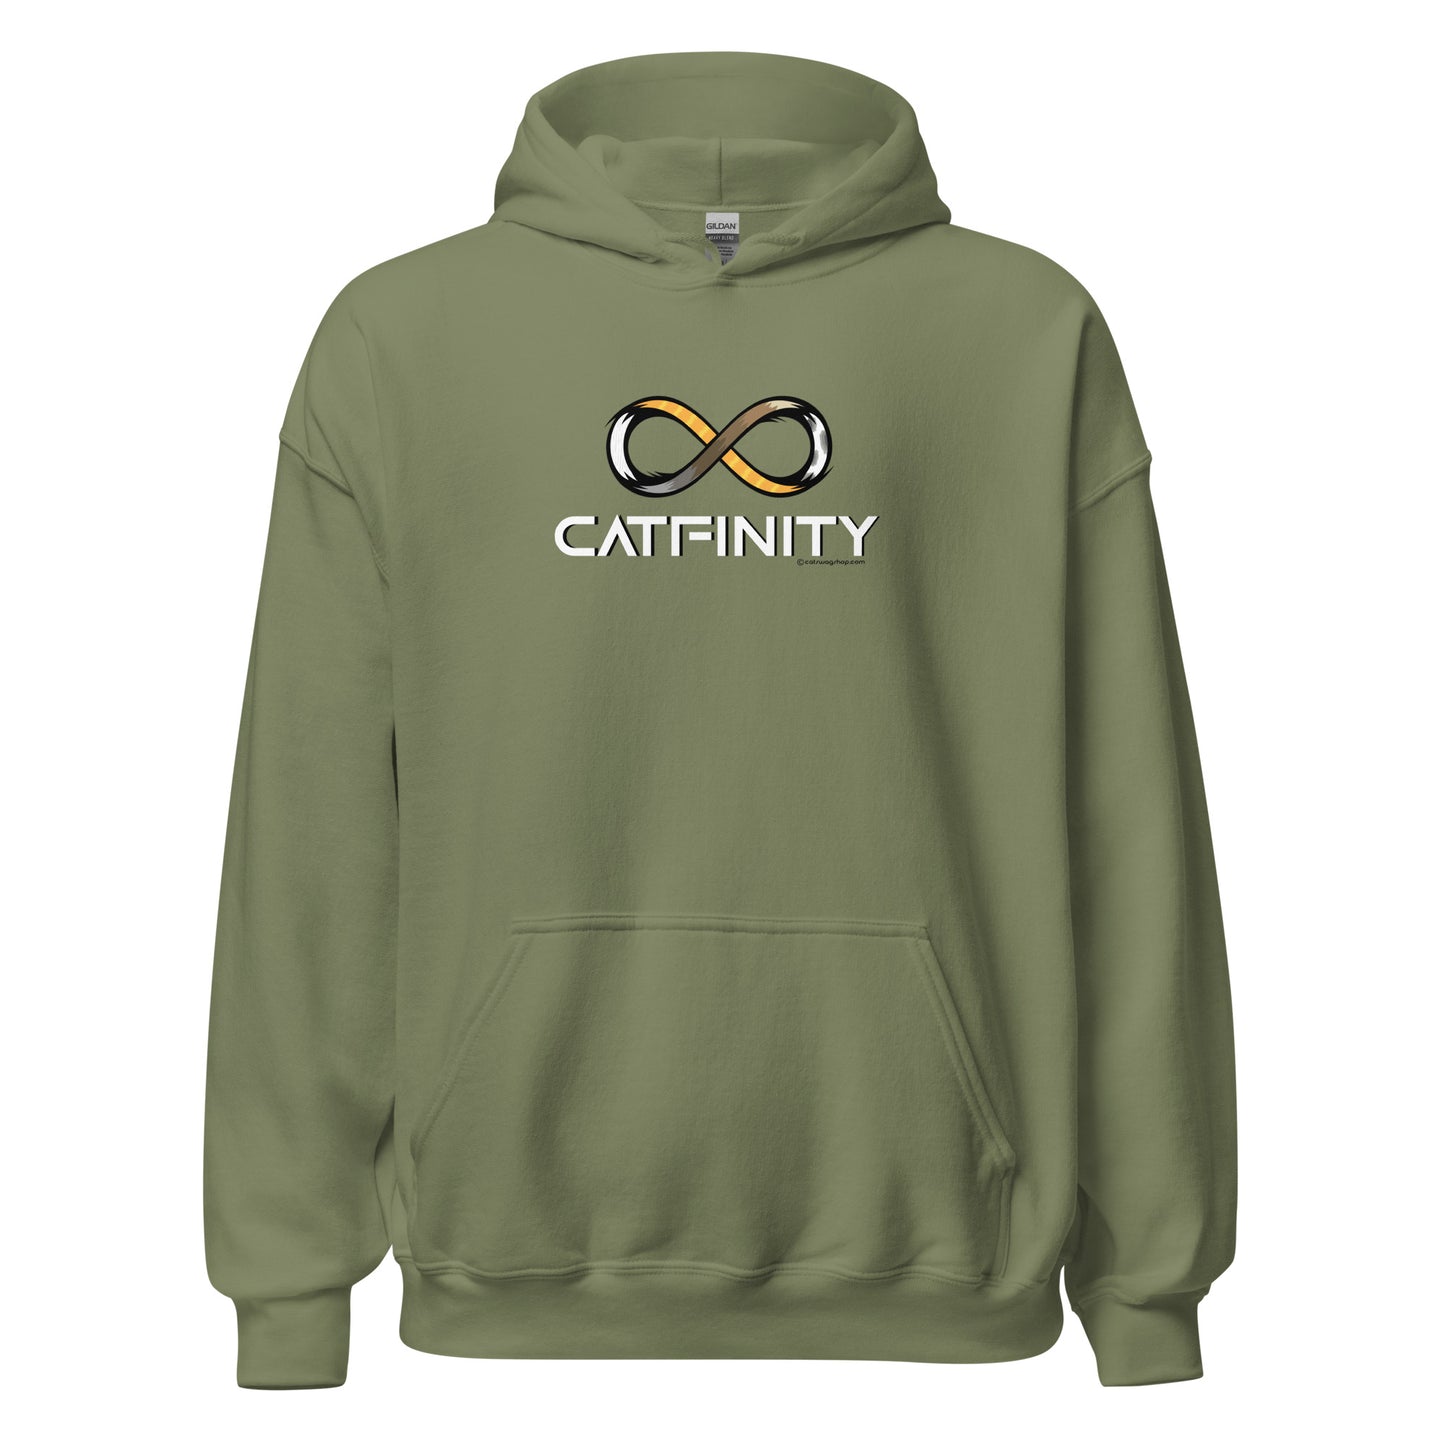 CATFINITY - Unisex Hoodie (Where cats and FURever Collide!)